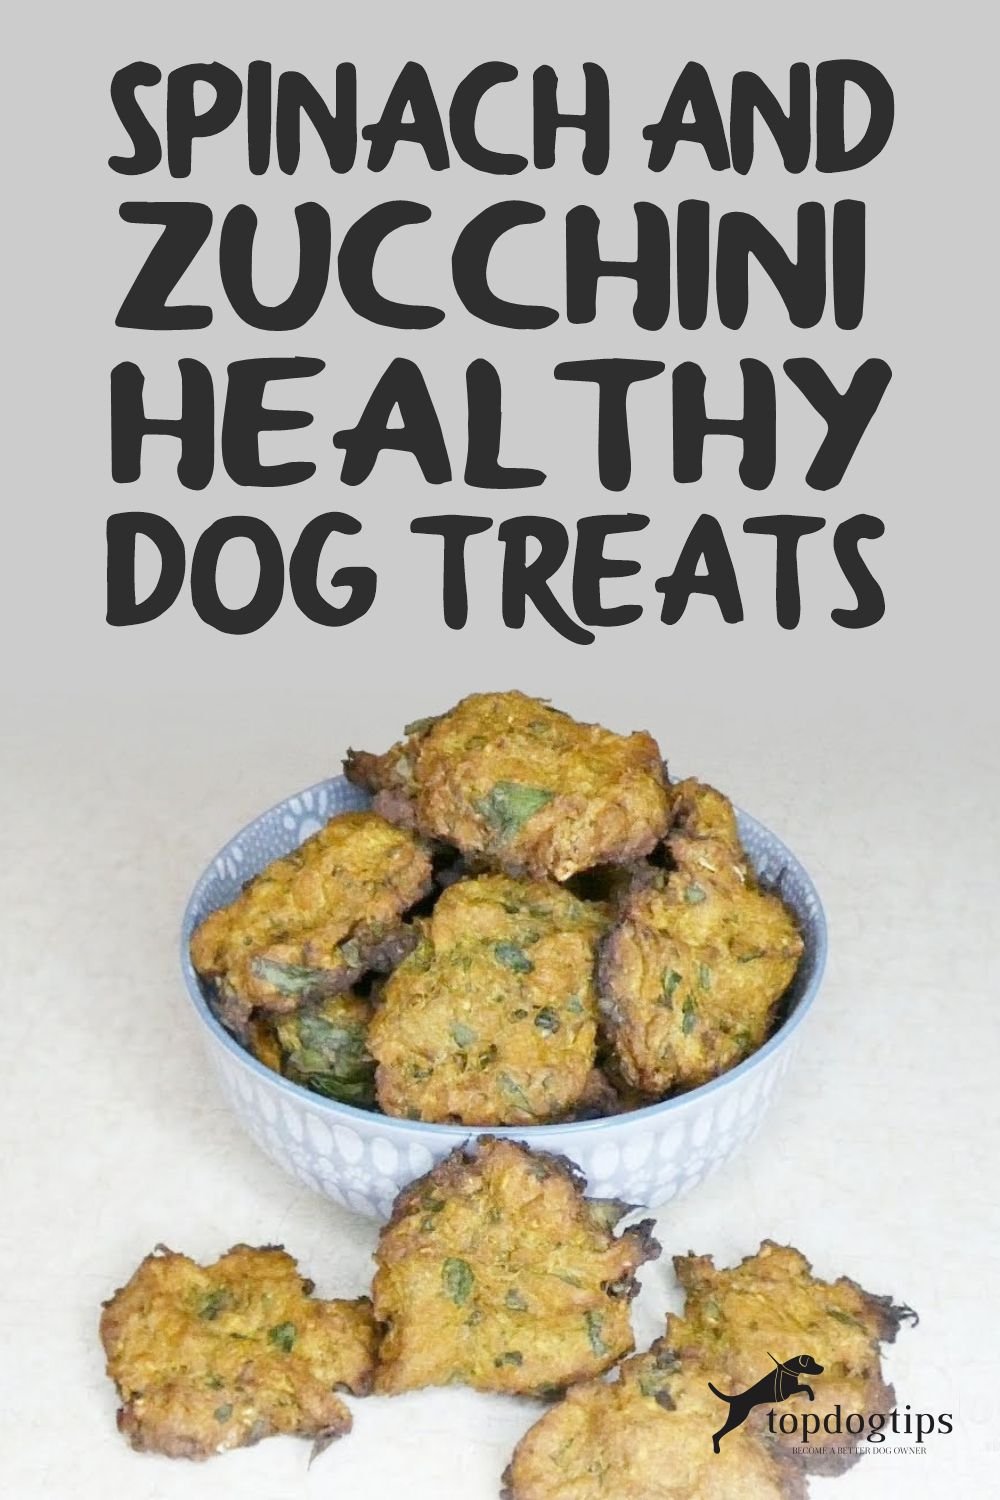 Spinach and Zucchini Healthy Dog Treats